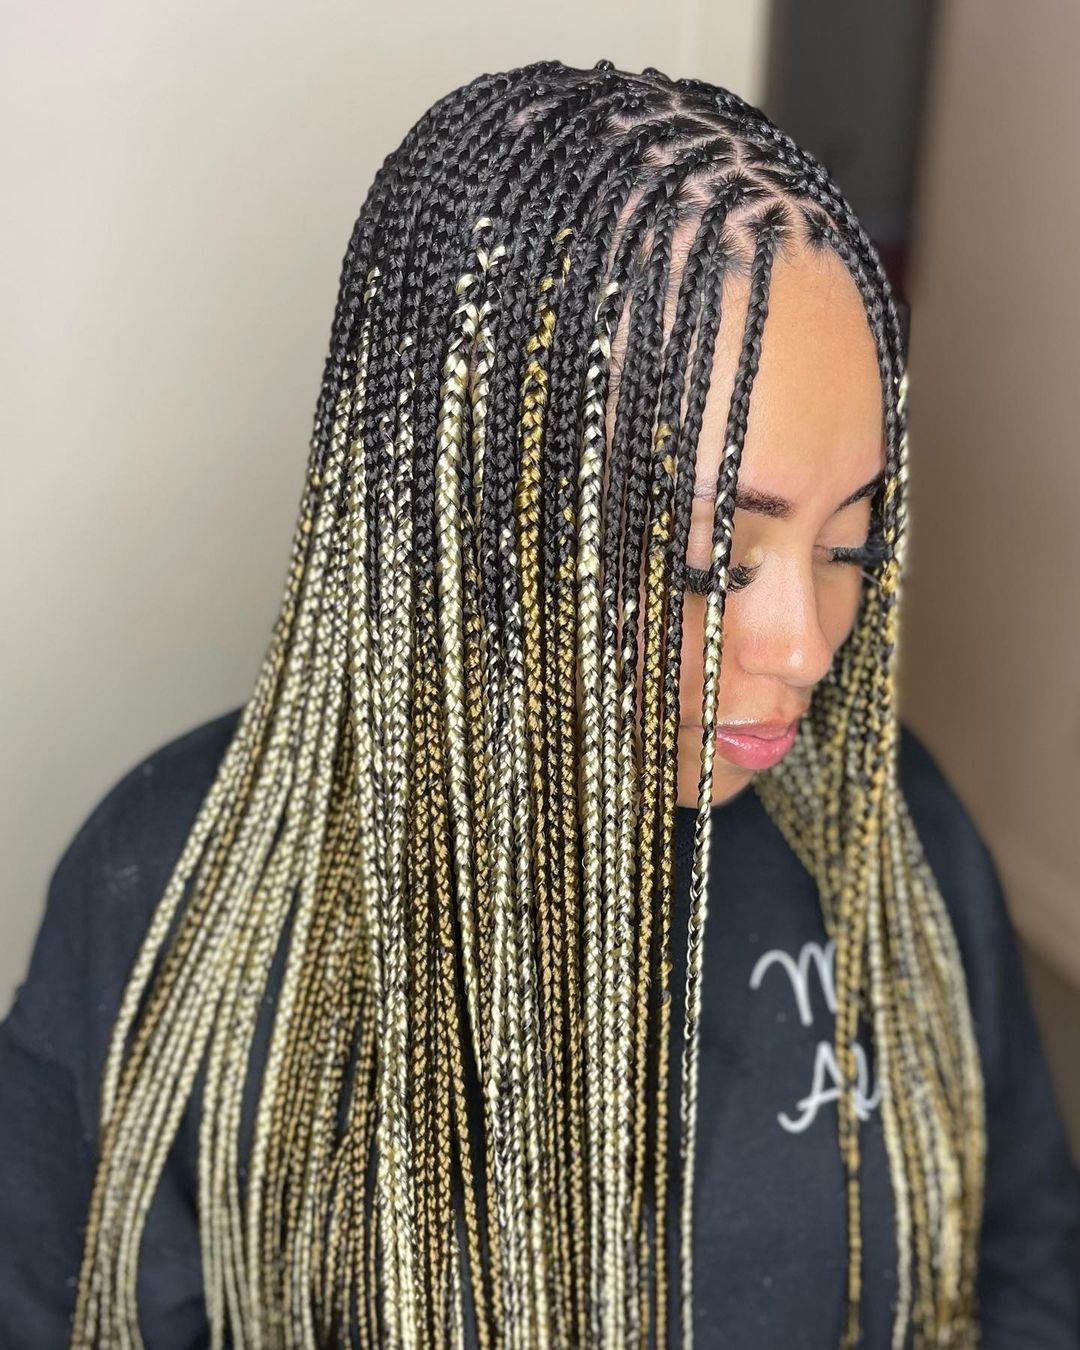 20 Awesome Micro Braids Hairstyles to Try on Any Hair Length - Hairstyle